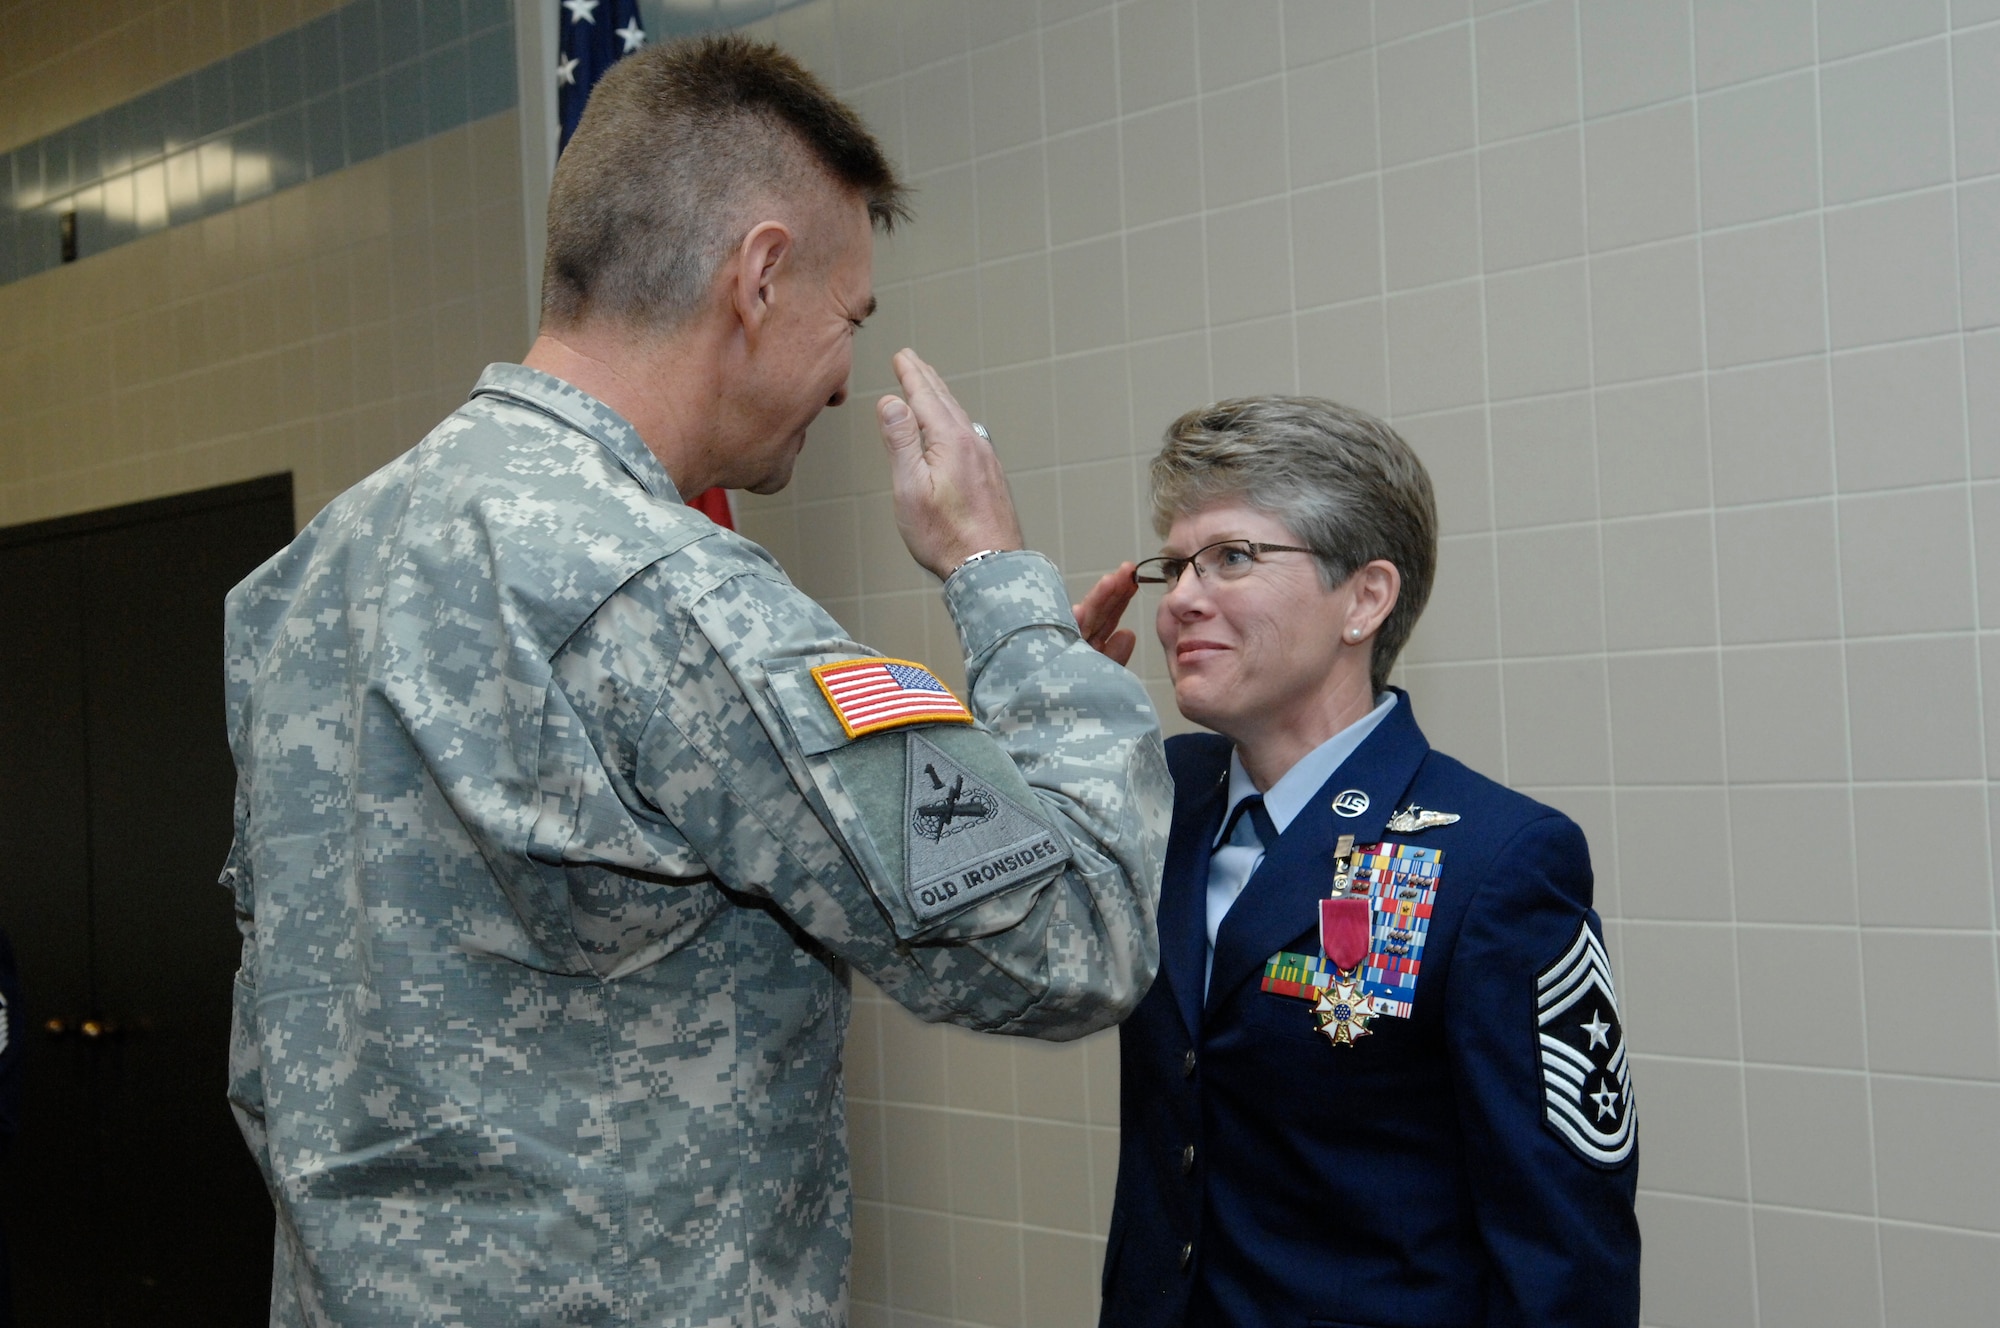 The Adjutant General of the Utah National Guard, Maj. Gen. Jefferson S. Burton, and State Command Chief Master Sergeant Denise Rager exchanged salutes during Rager's retirement ceremony at the Utah Air National Guard base, April 6, 2013. After 27 years of dedicated military service, Rager formally retired as the top enlisted service member in the Utah Air Guard. (U.S. Air Force photo by Senior Master Sgt. Gary Rihn)(RELEASED) 